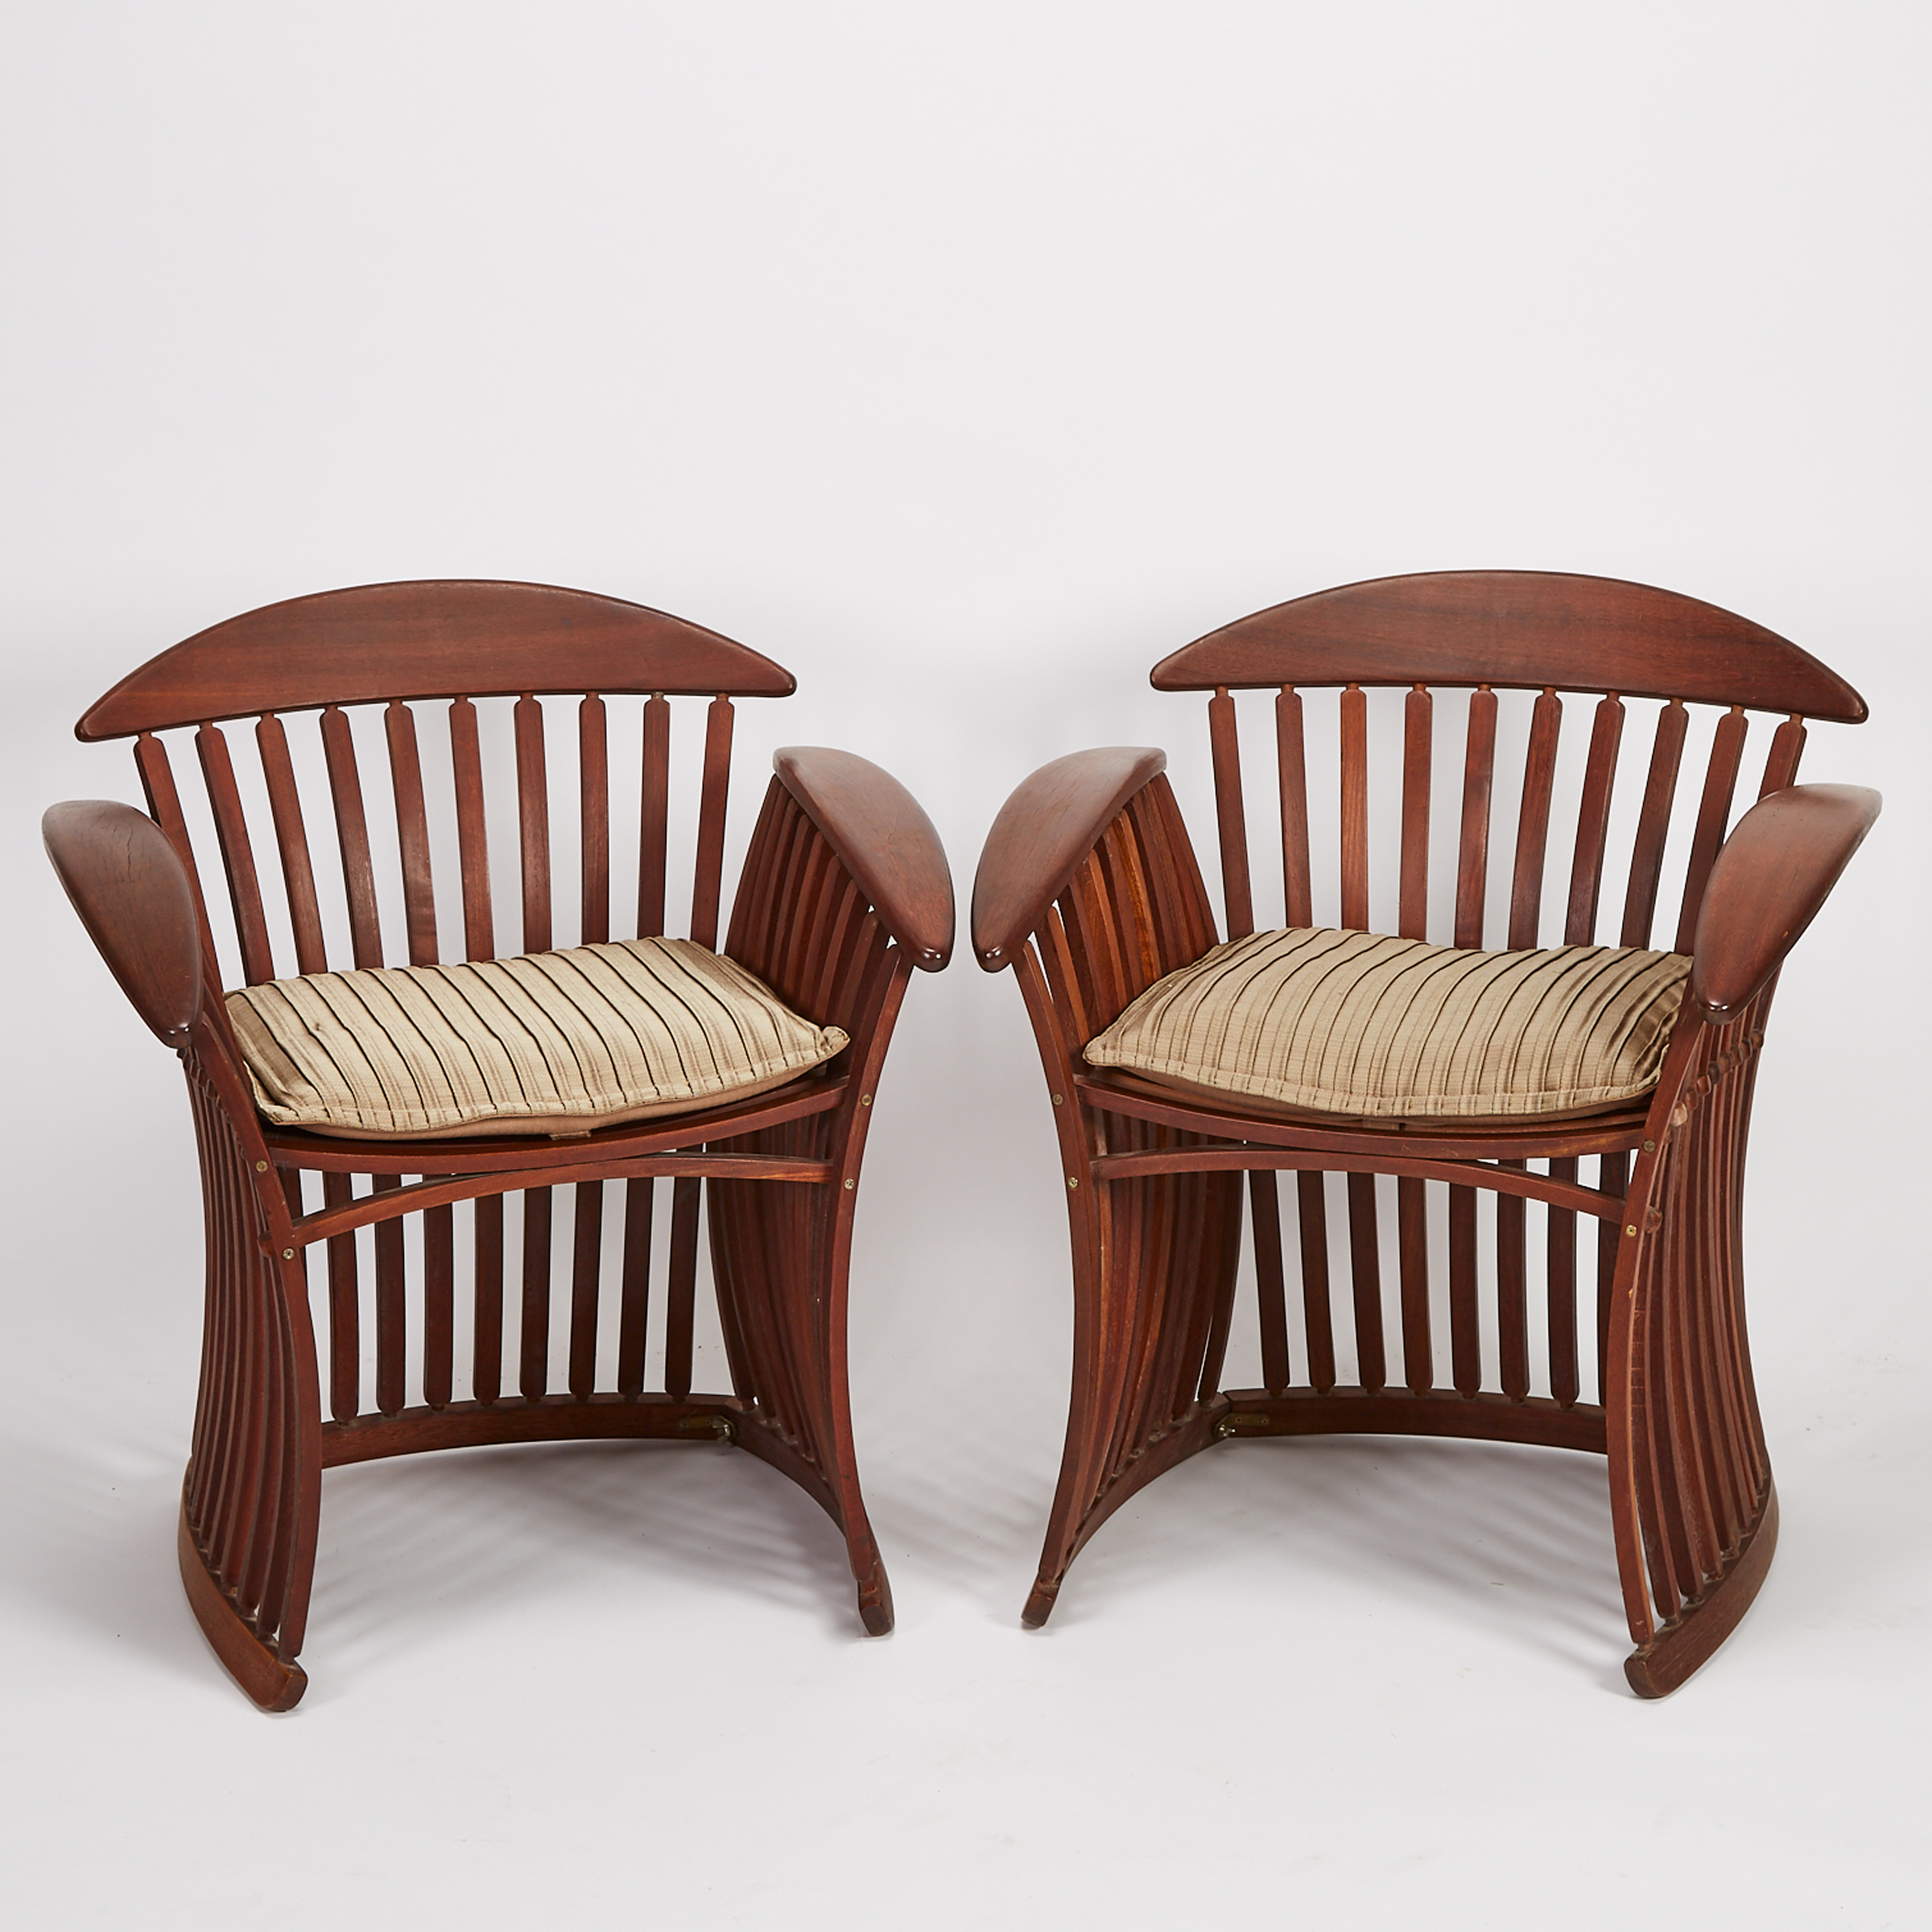 Pair of Bentwood ‘Steamer’ Club Chairs by Thomas Lamb, c.1975